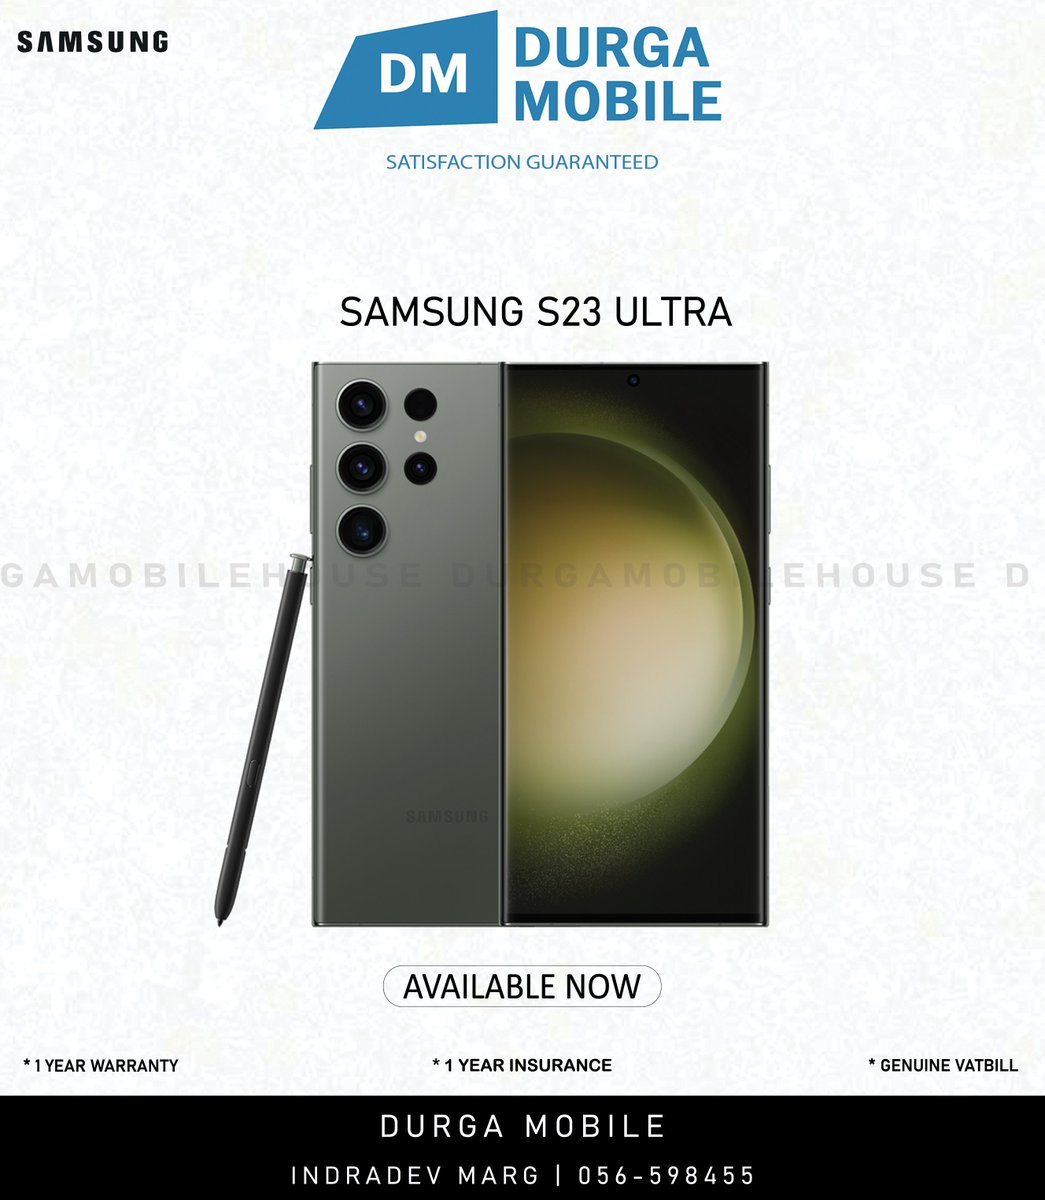 SAMSUNG S23 ULTRA | AVAILABLE NOW
📍INDRADEV MARG
📞056-598455
🚚 DELIVERY ALL OVER NEPAL
💭 VISIT OUR SHOWROOM FOR MORE INFORMATION

SOCIAL MEDIA :
facebook.com/durgamobilehou…
instagram.com/durgamobilehou…
twitter.com/imdurgamobile
.
.
#Samsung  #samsungs23ultra #durgamobilehouse